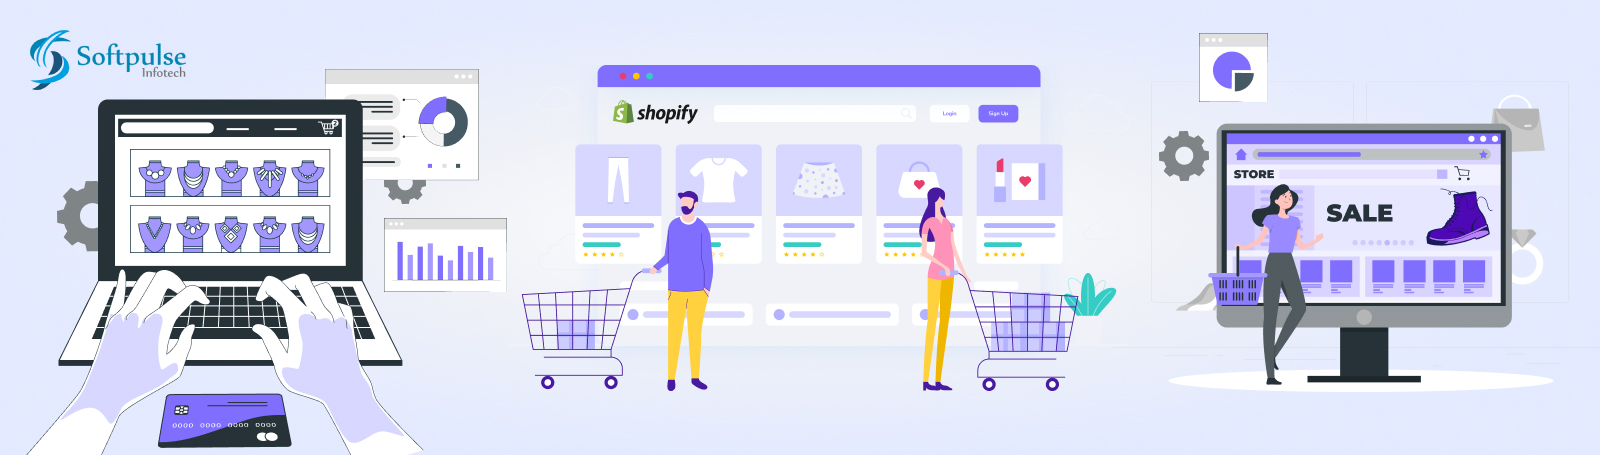 Shopify Website Examples: 10 Shopify Store Build by Softpulse Infotech Pvt. Ltd.